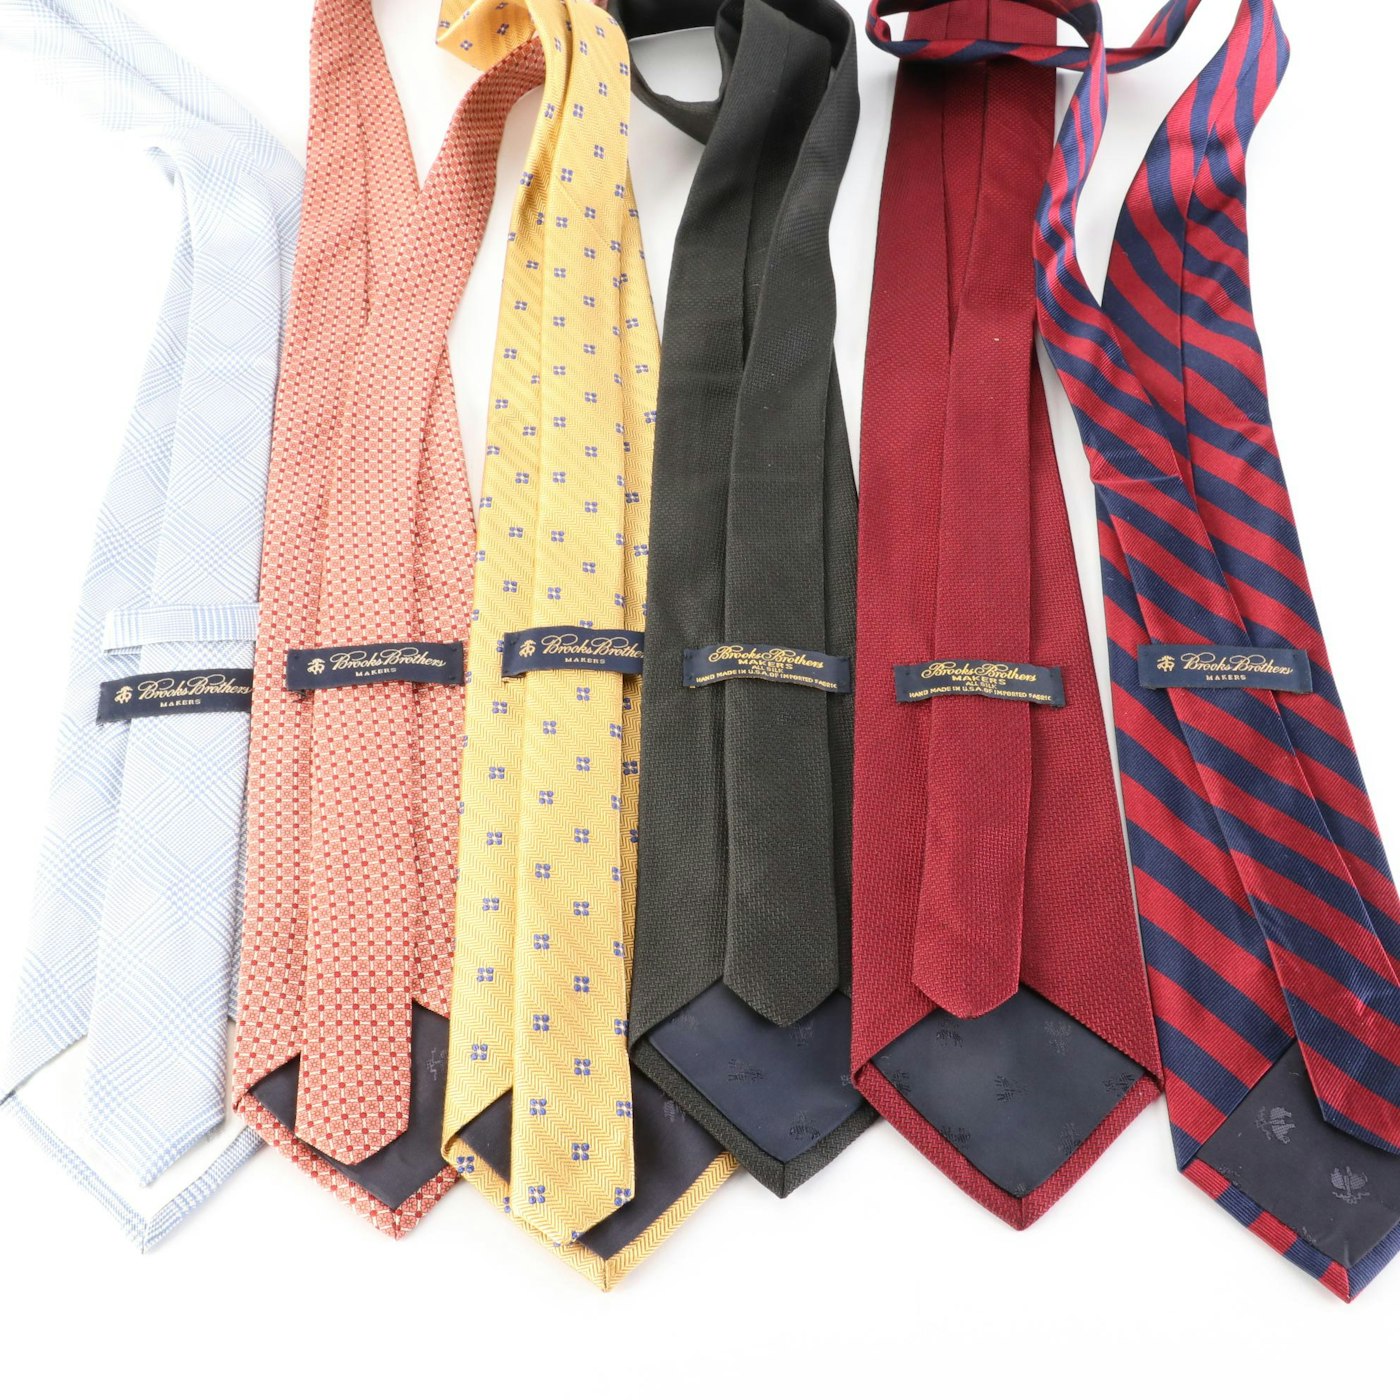 Brooks Brothers Patterned, Striped and Solid Color Silk Neckties | EBTH